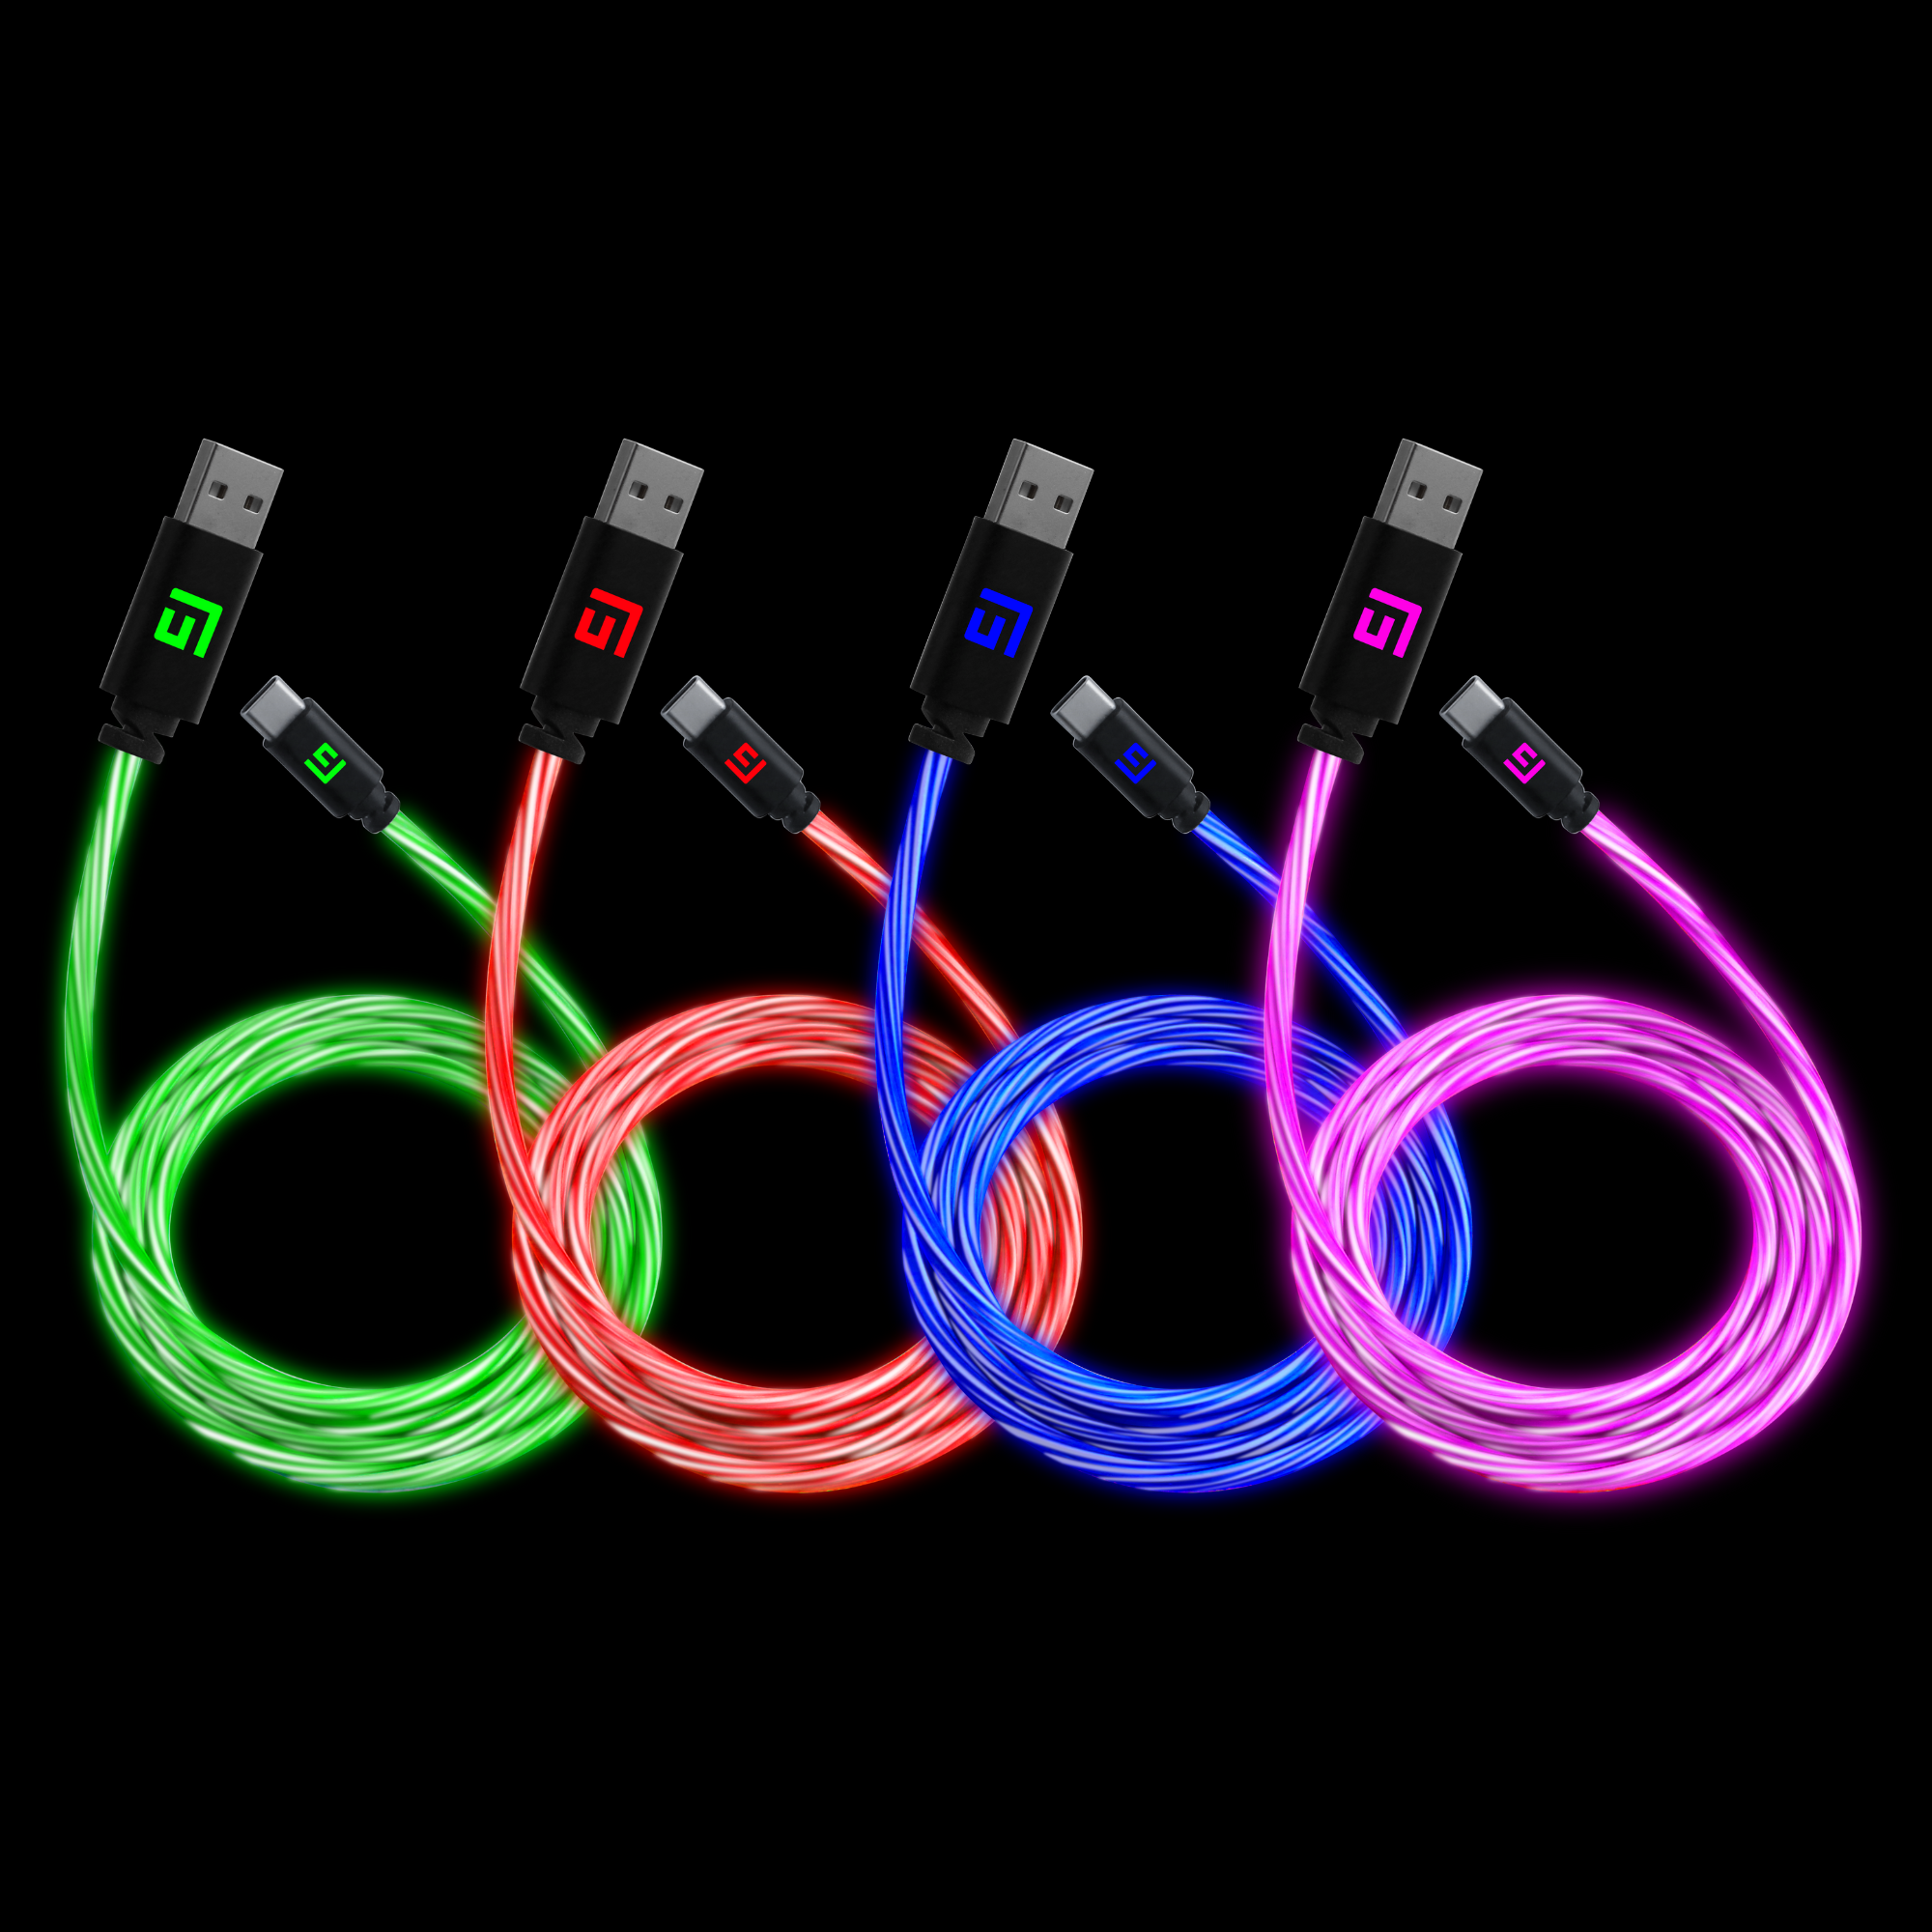 0,5M/2ft LED USB-C/USB-A Cable | High-Speed Charging + Sync (4 Pack)